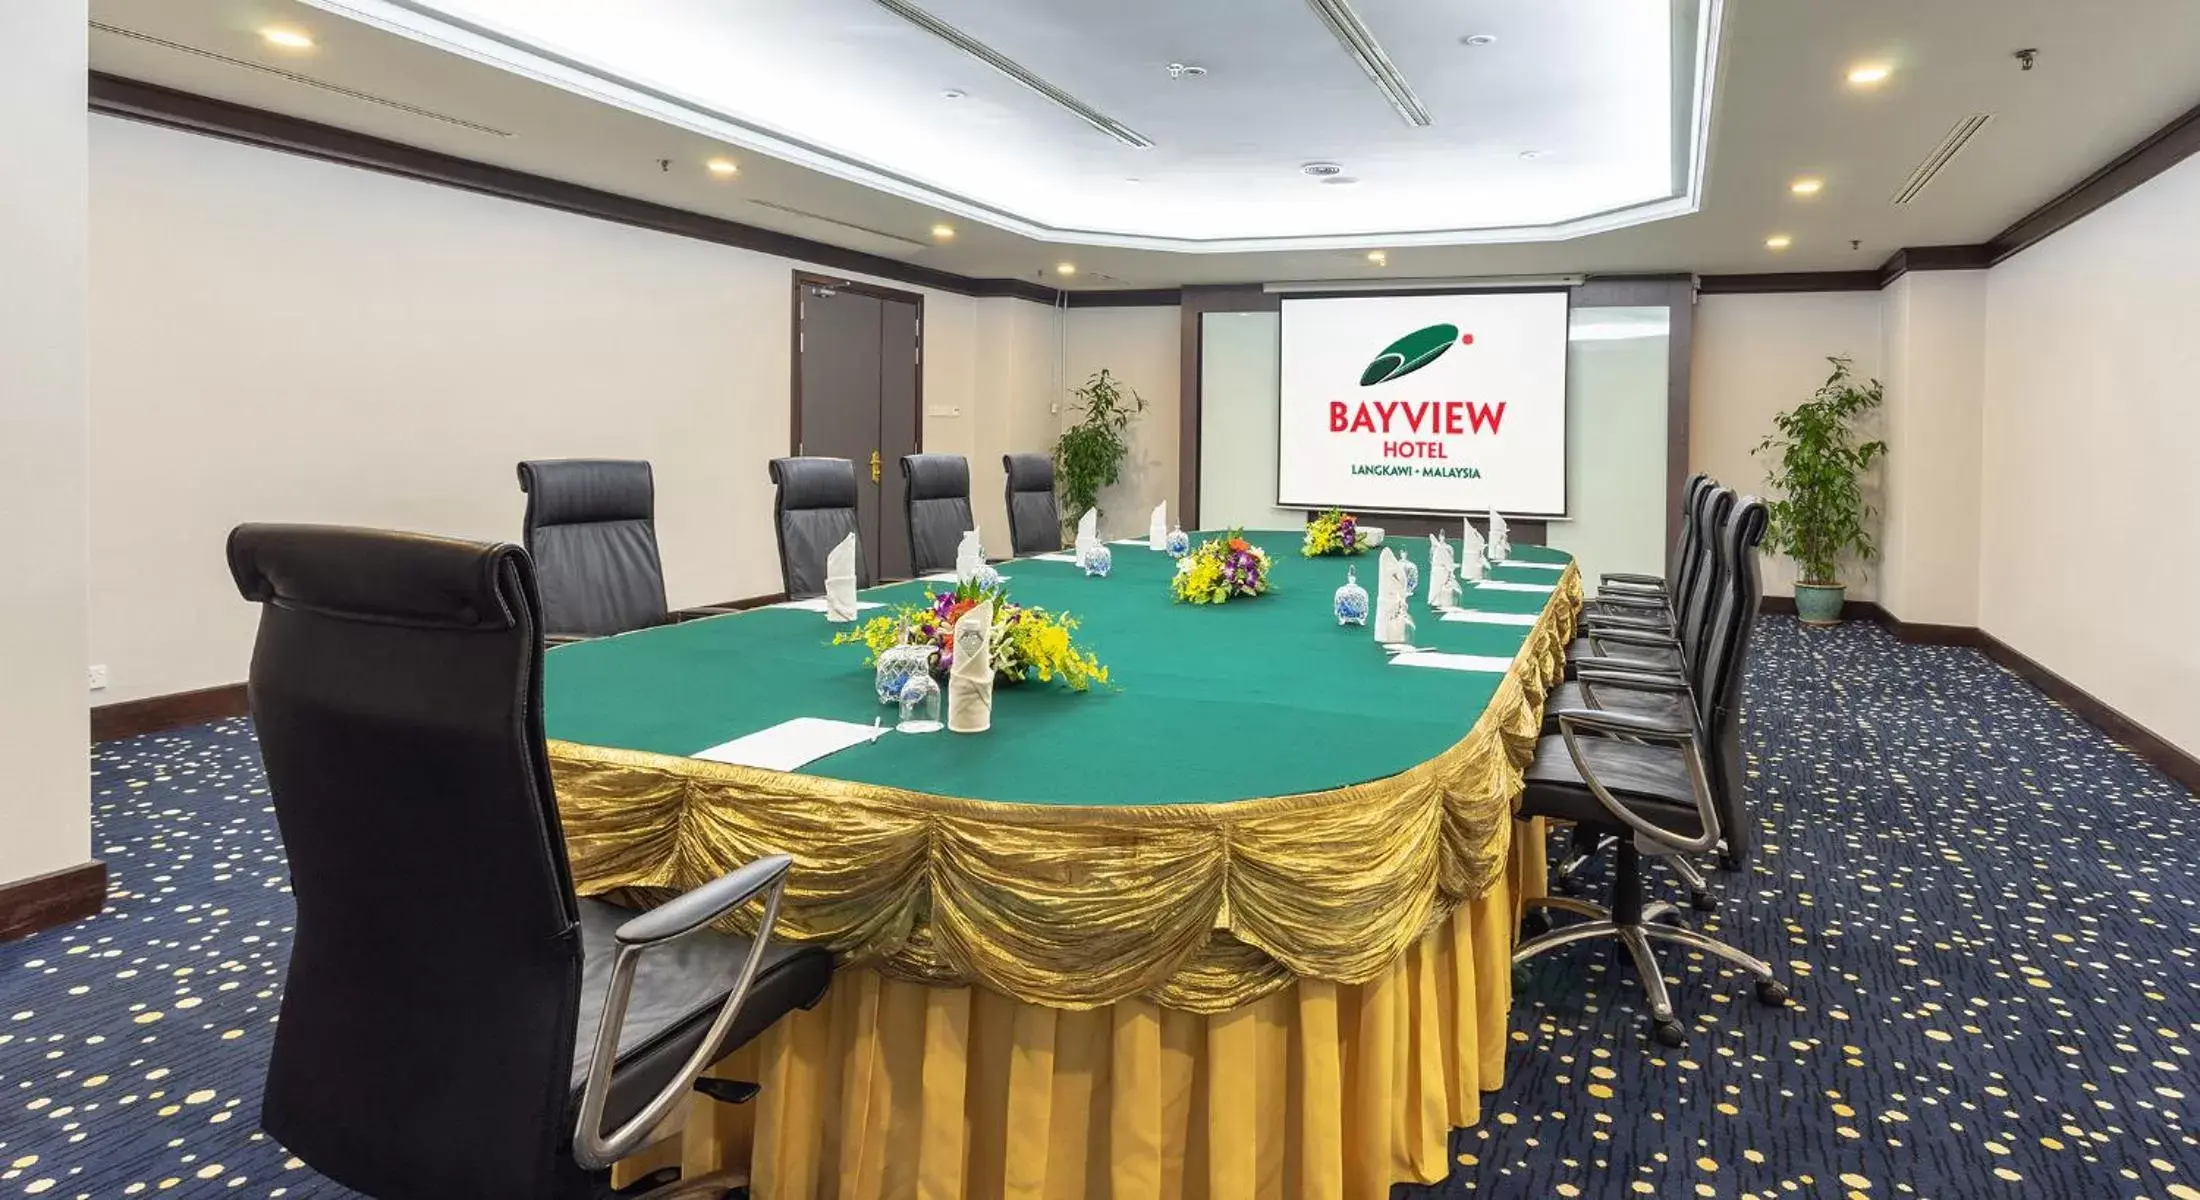 Meeting/conference room in Bayview Hotel Langkawi